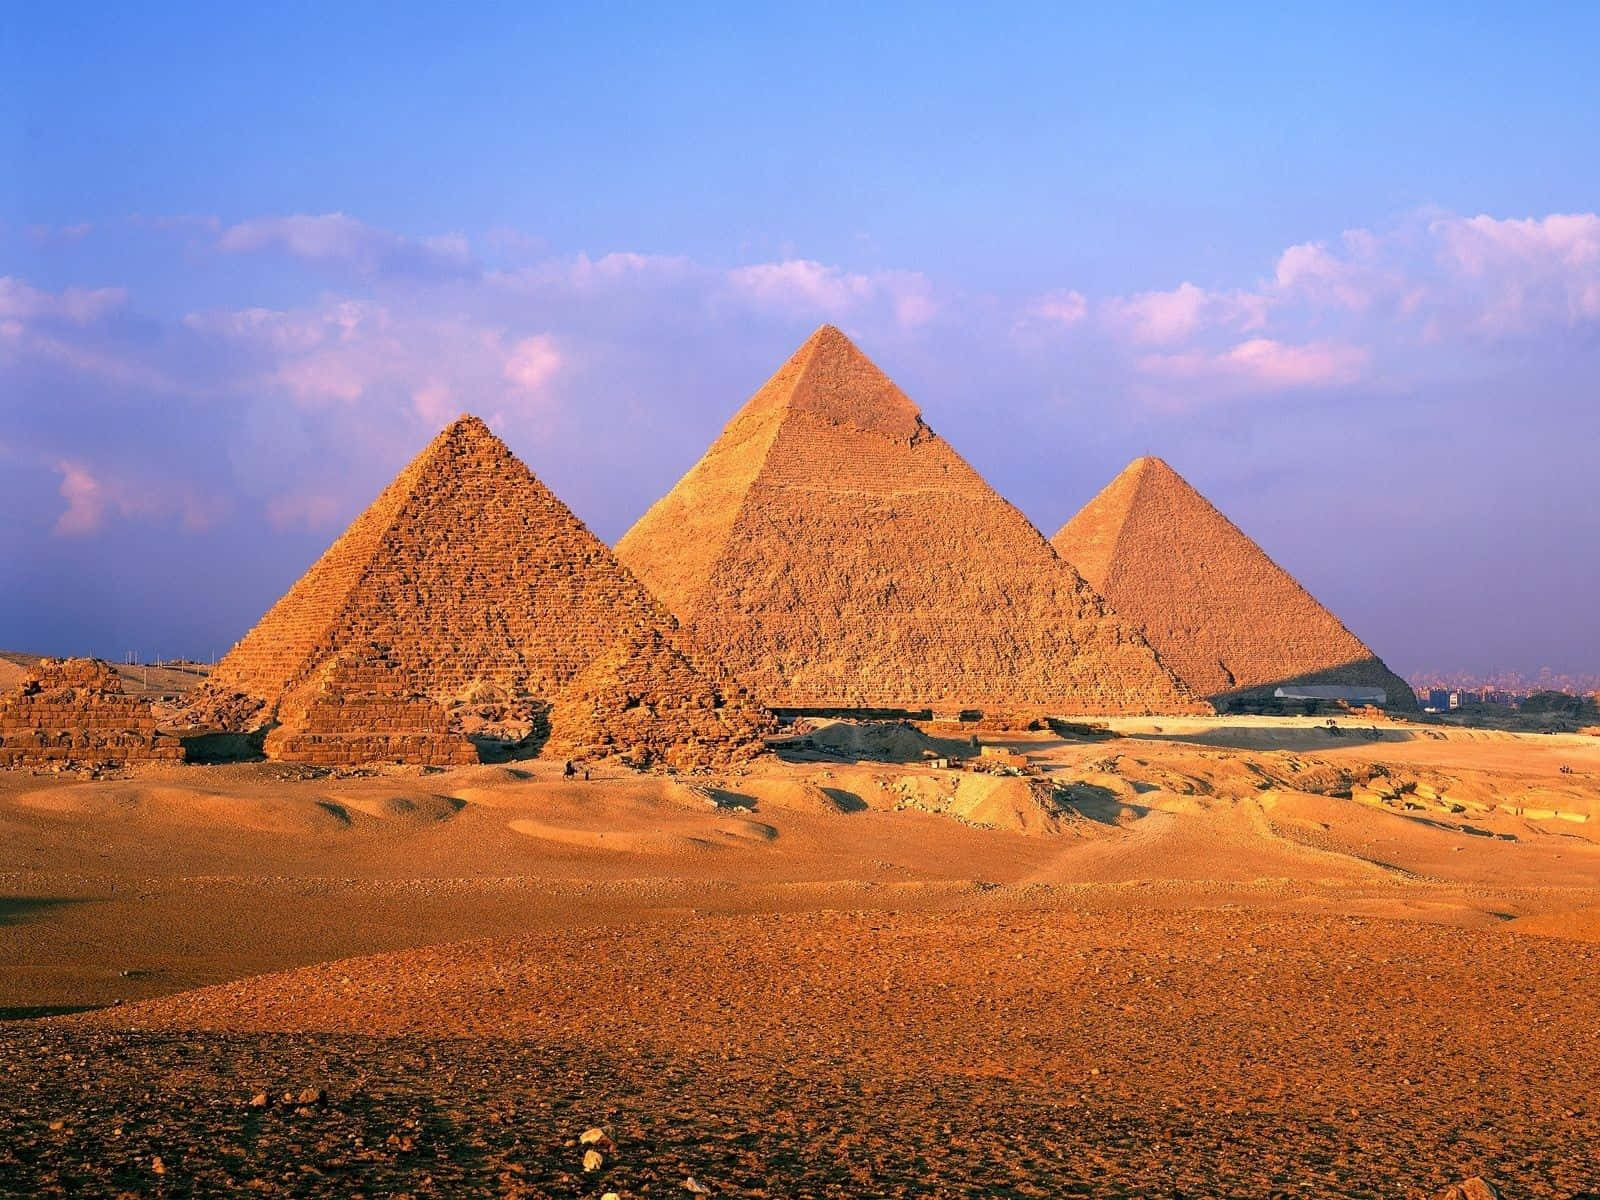 Pyramids of Giza and the Great Sphinx in Egypt